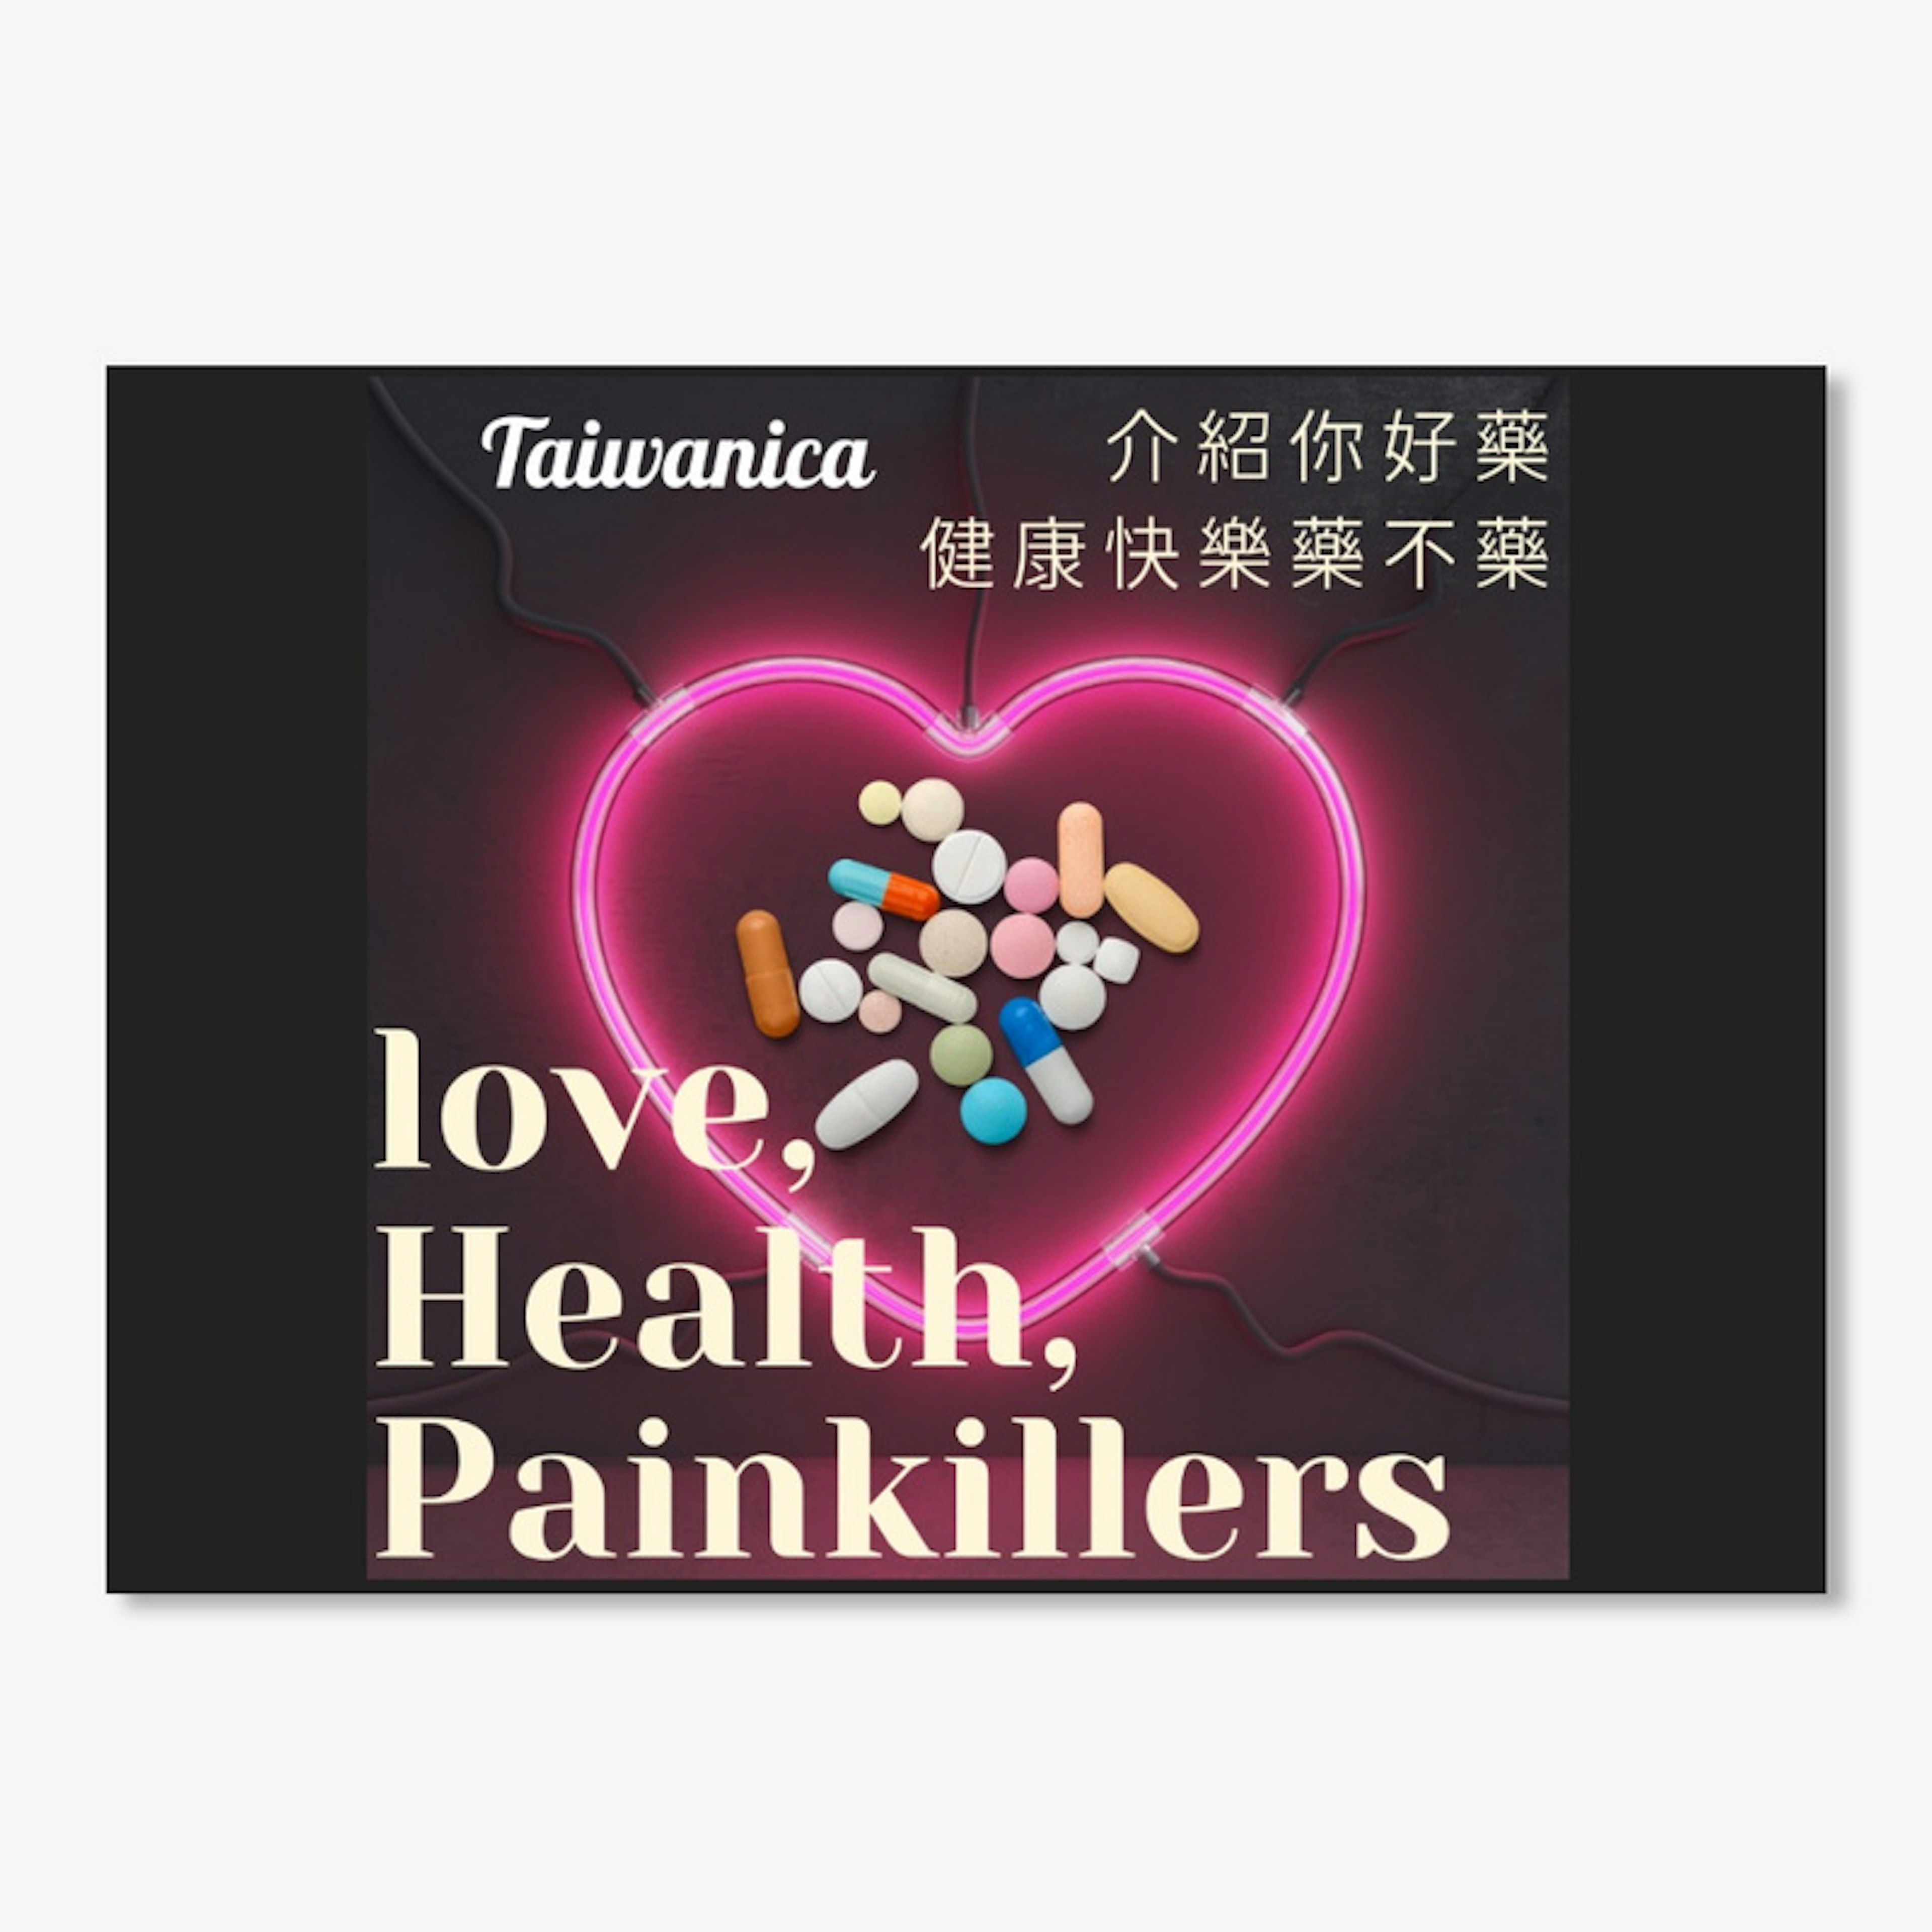 Taiwanica Loves Drugs!